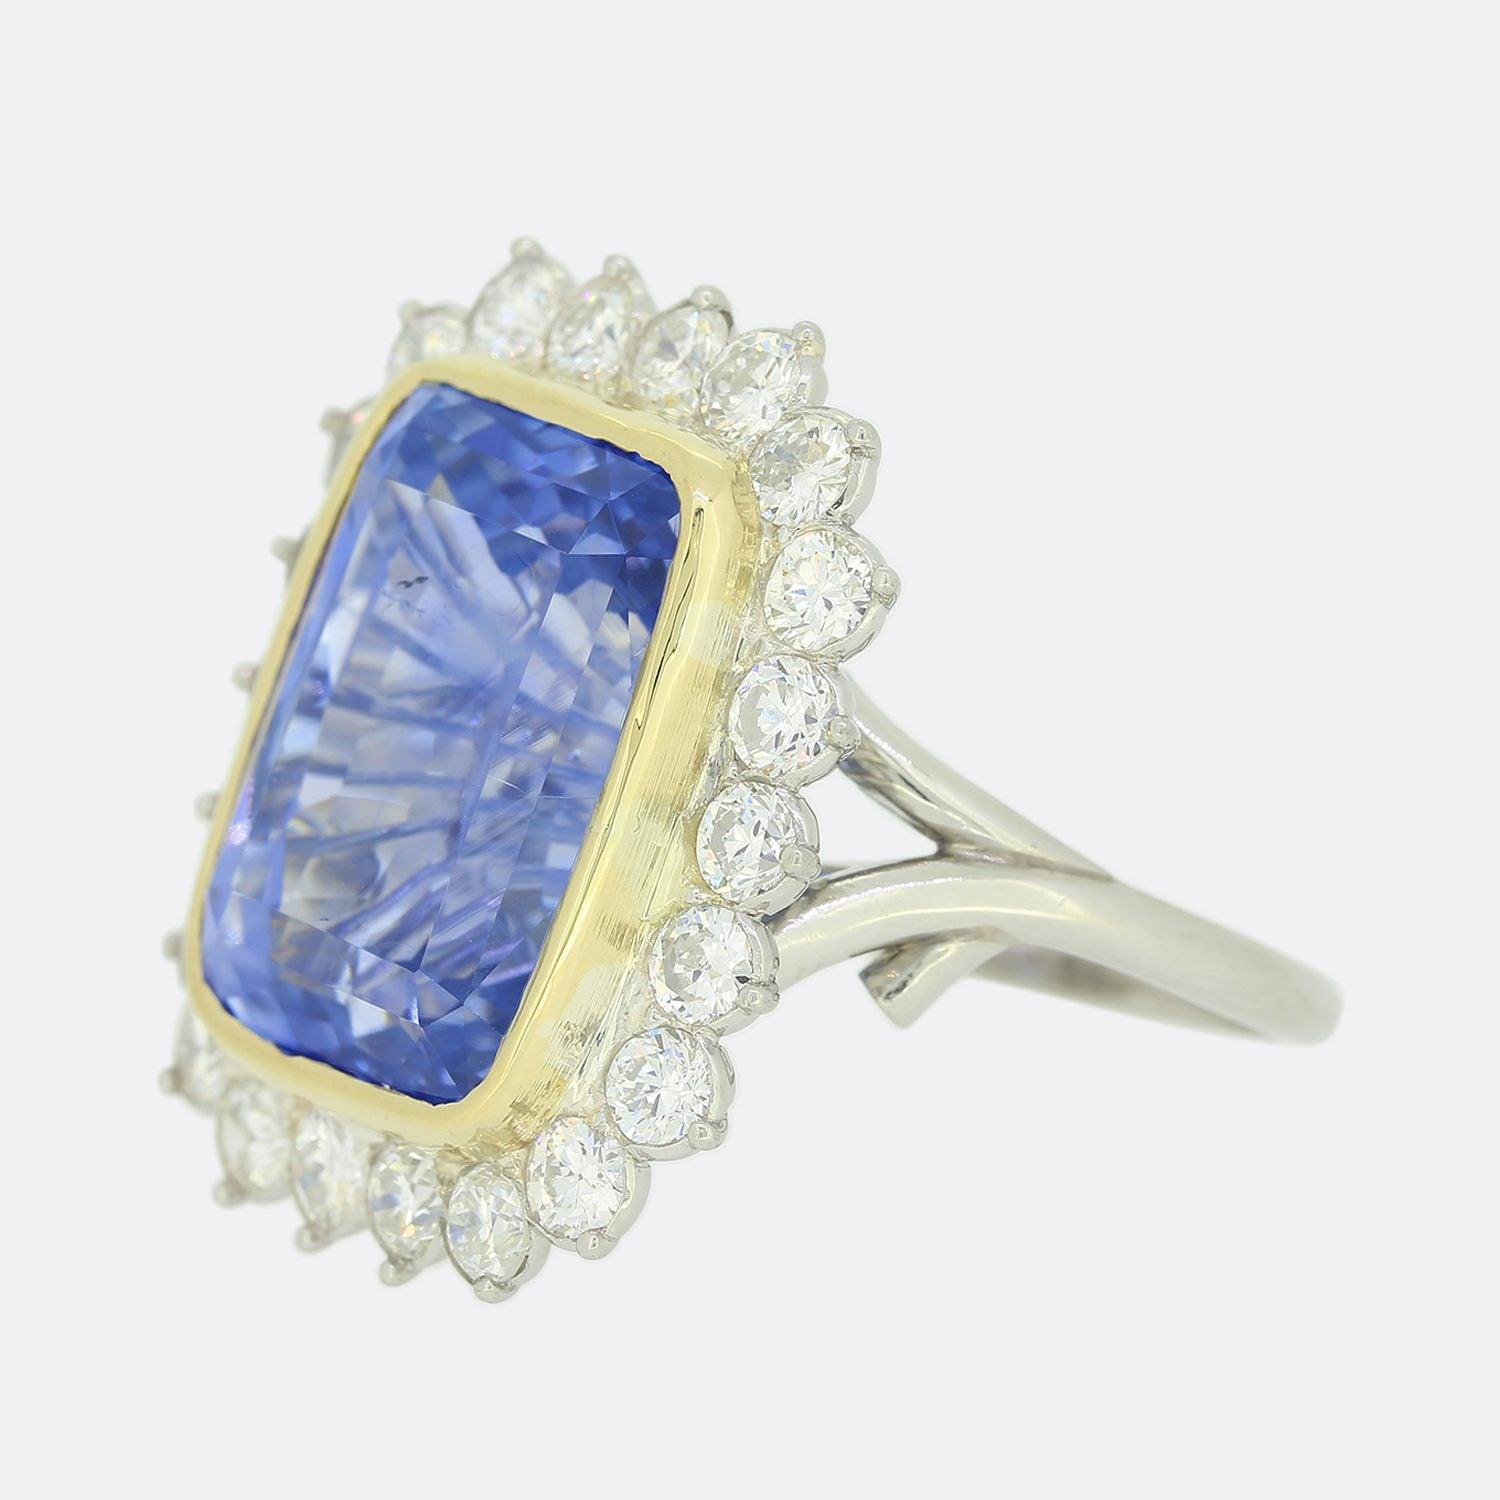 This is a truly wonderful, French sapphire and diamond cluster ring. The cushion cut sapphire is untreated, of ceylon origin and a highly desirable mid blue tone. It is surrounded by 22 bright white round brilliant cut diamonds which sit slightly